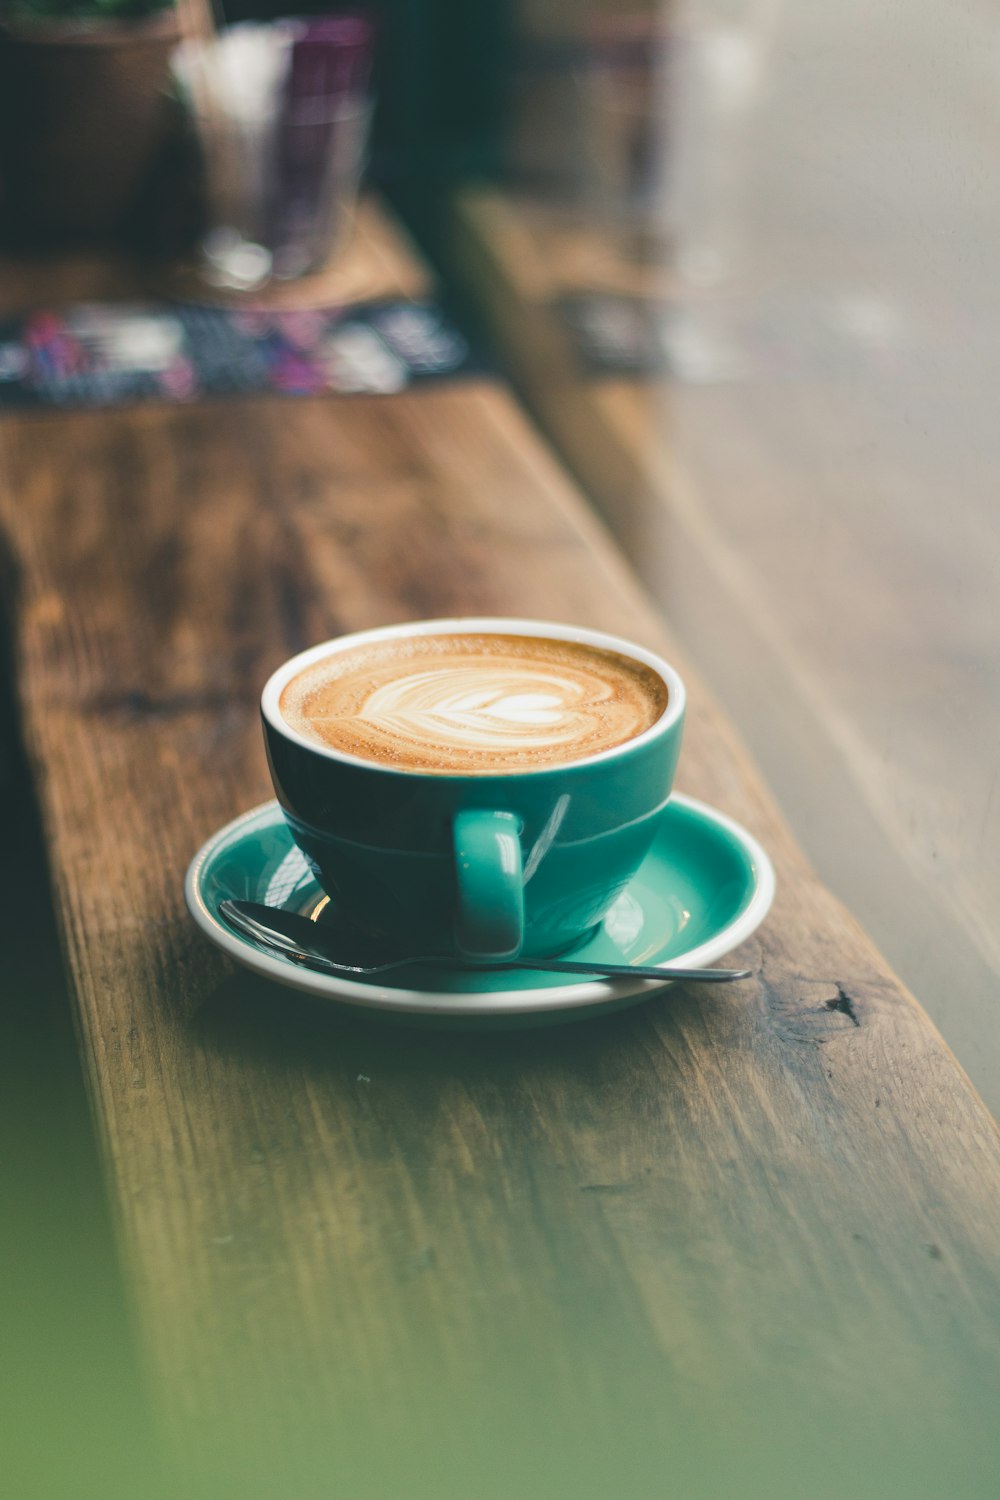 Download 100+ Coffee Wallpapers HD | Download Free Images & Stock Photos On Unsplash